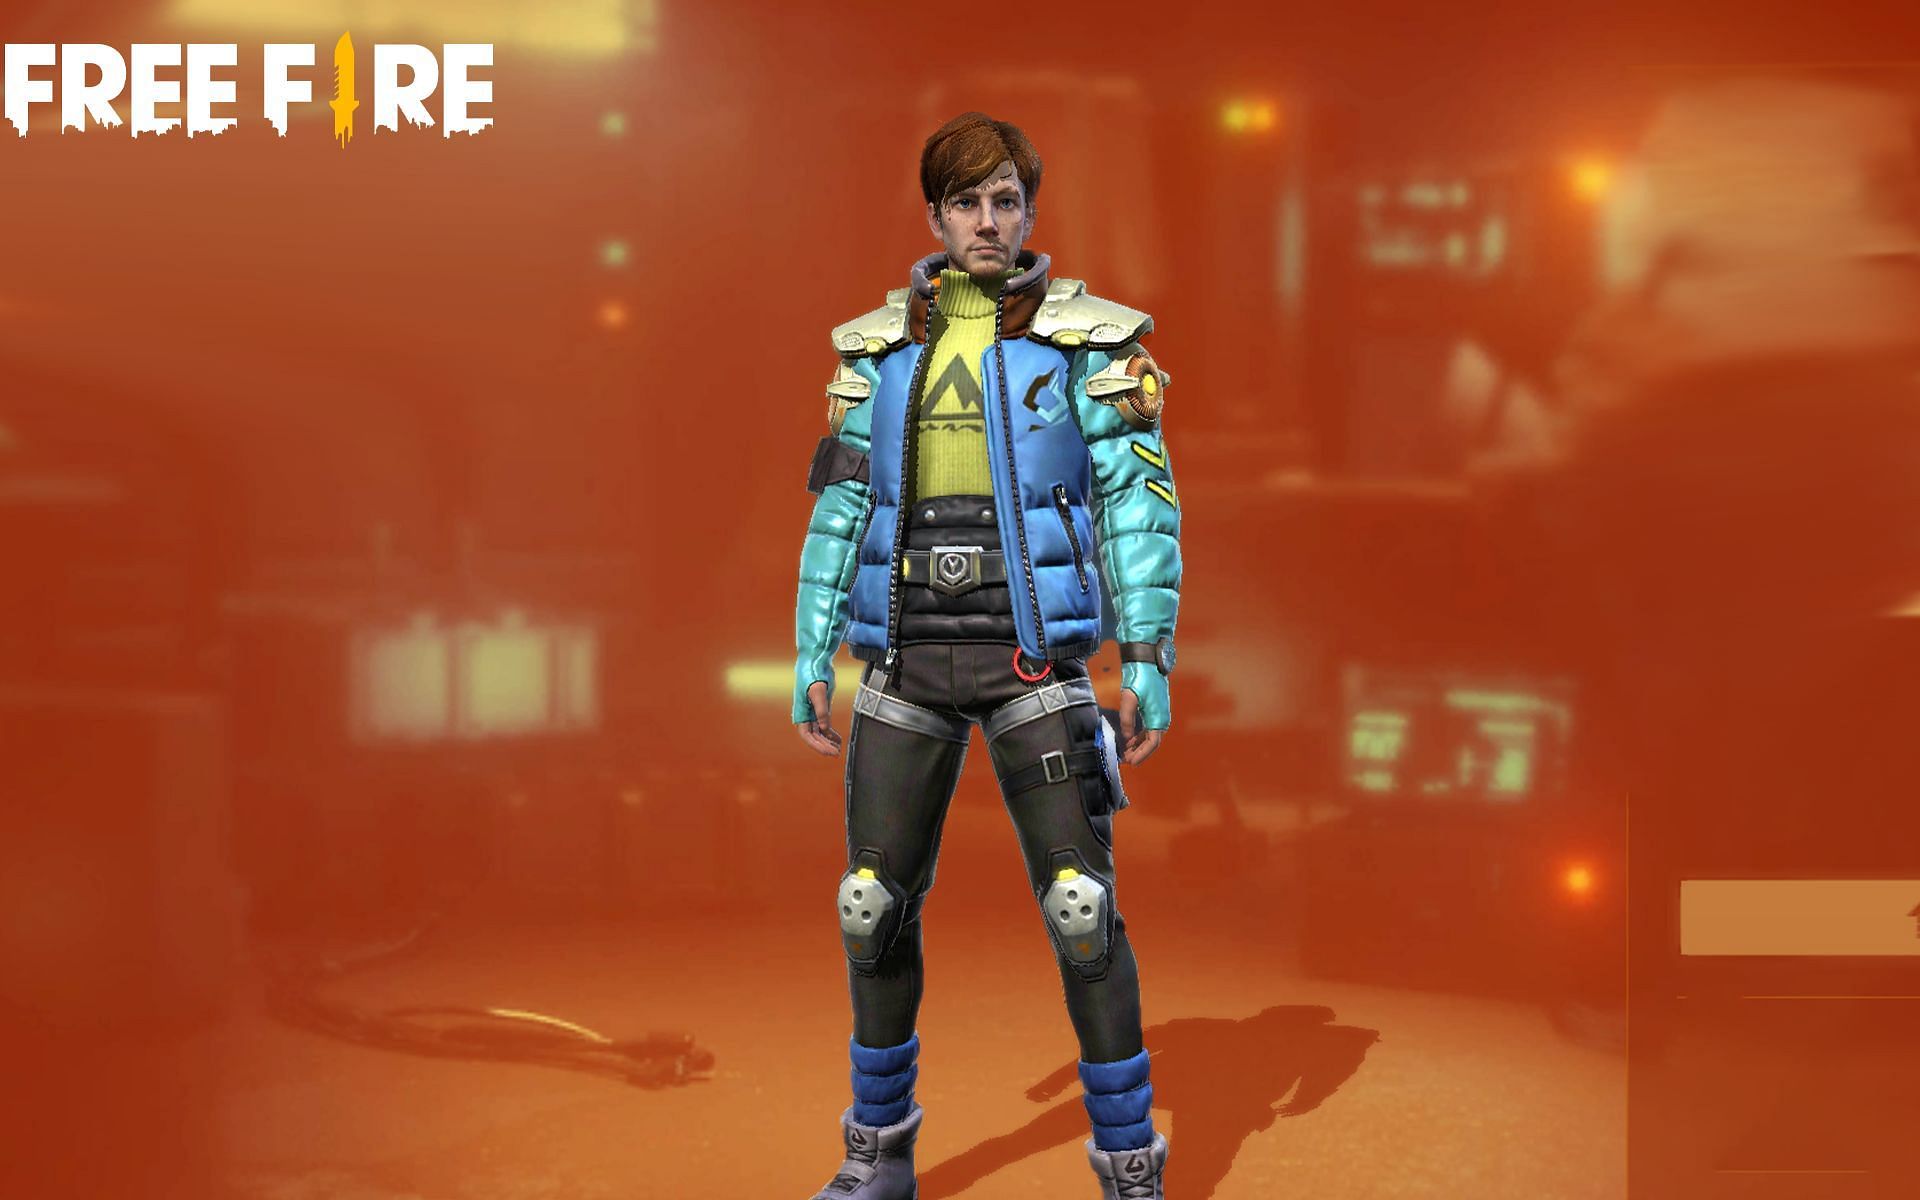 Nairi has been incorporated into the game (Image via Free Fire)